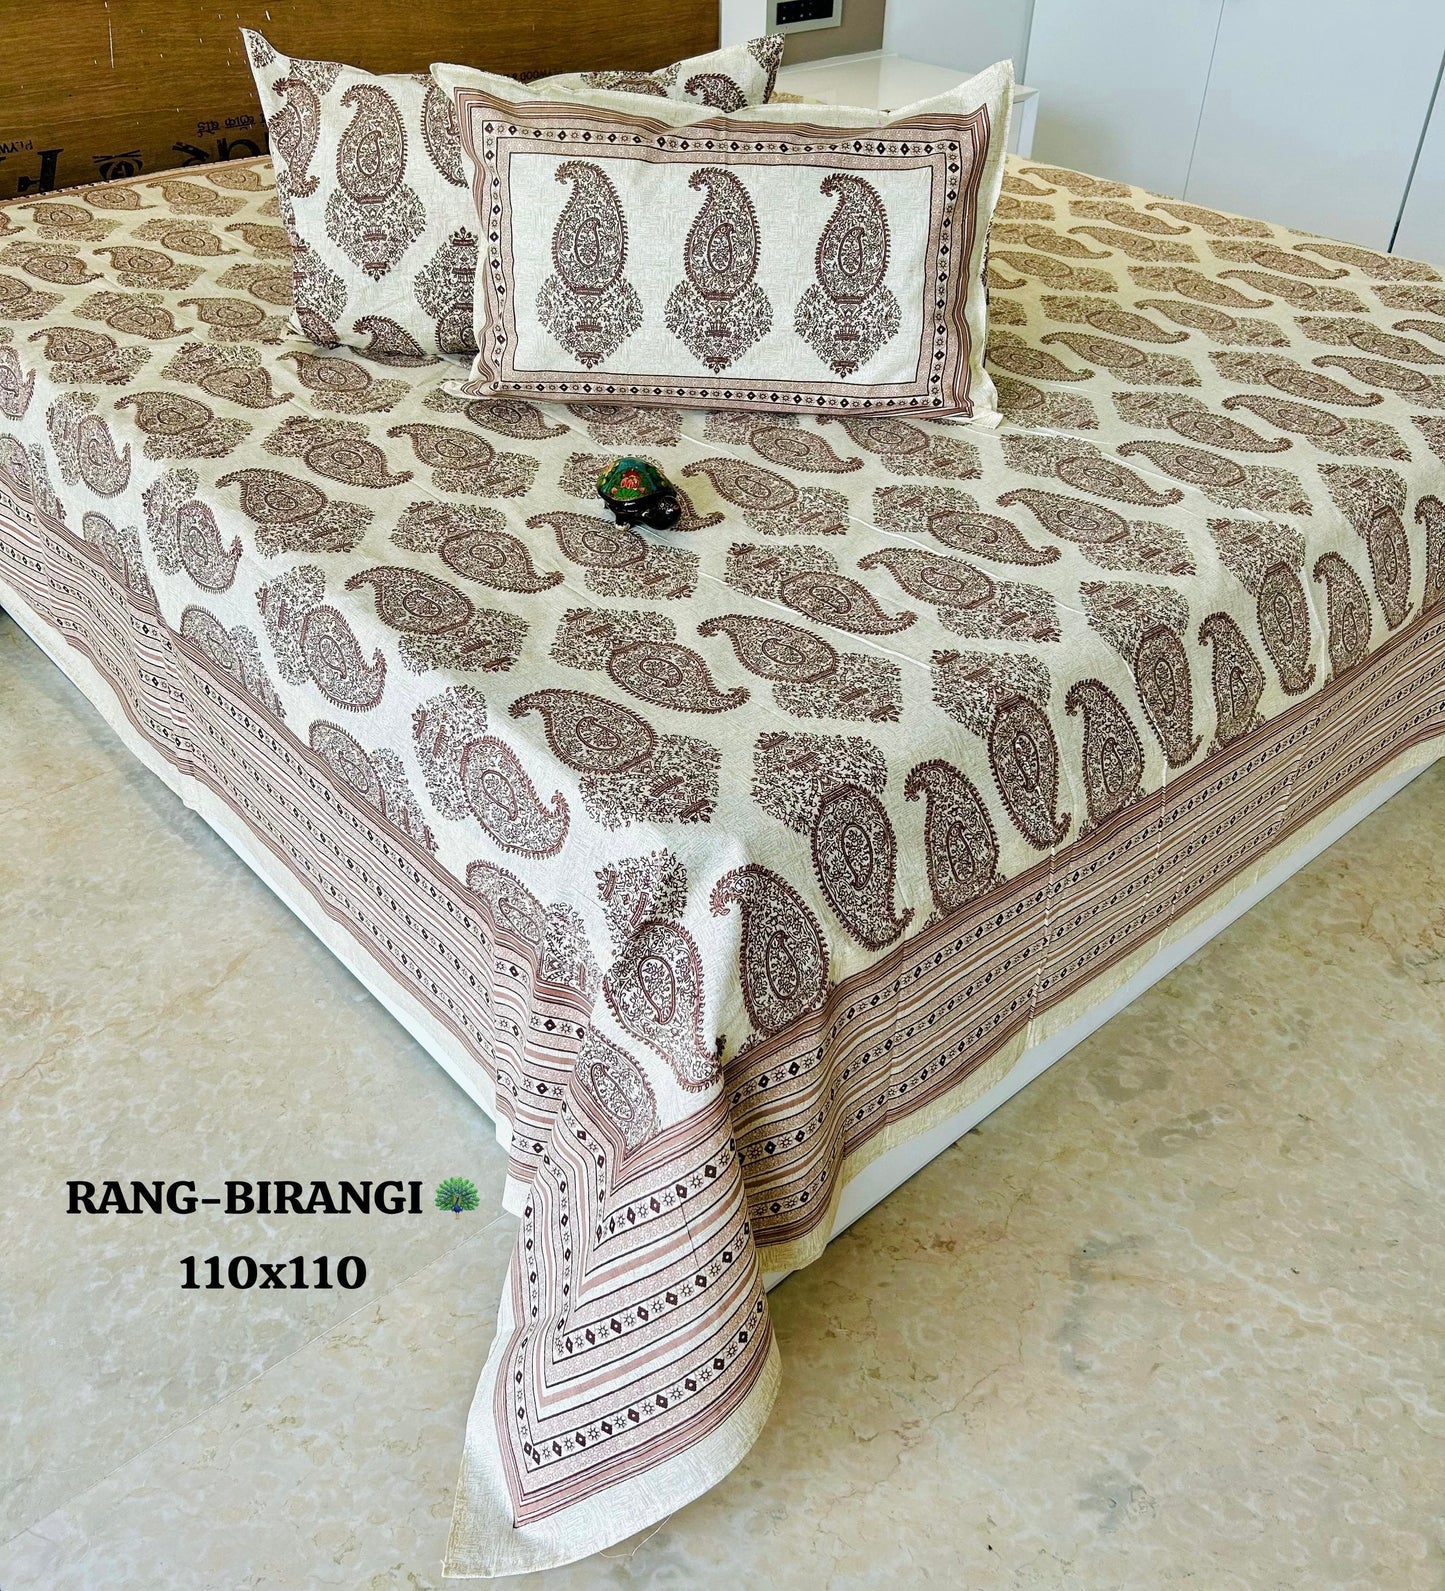 Splendour Thin Printed Bedspread Bedcover (Super King 110x110 inches)